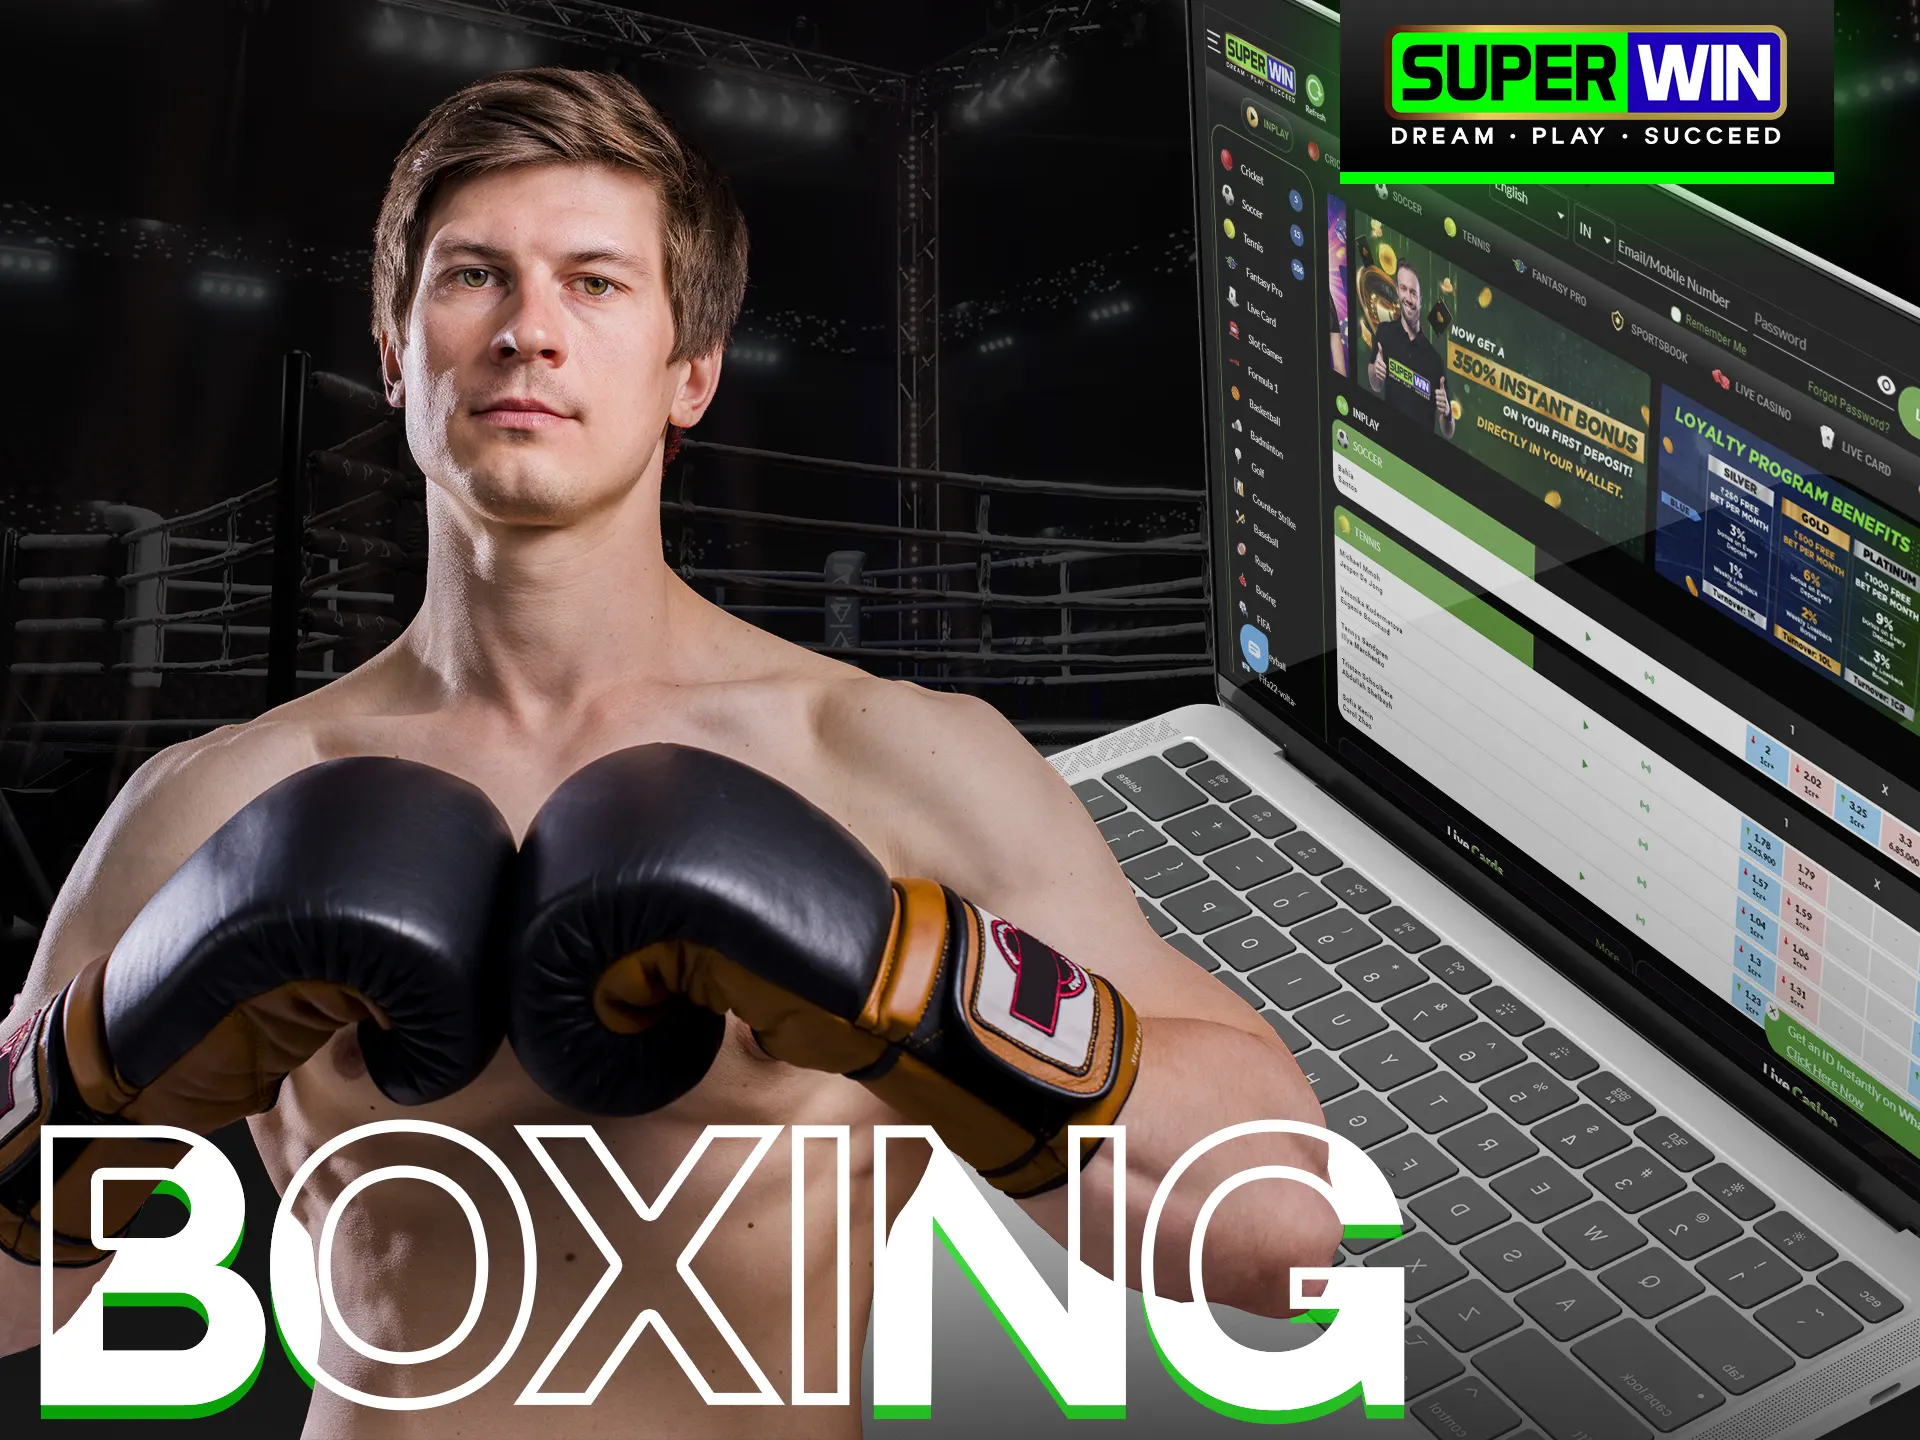 With Superwin, bet on boxing.